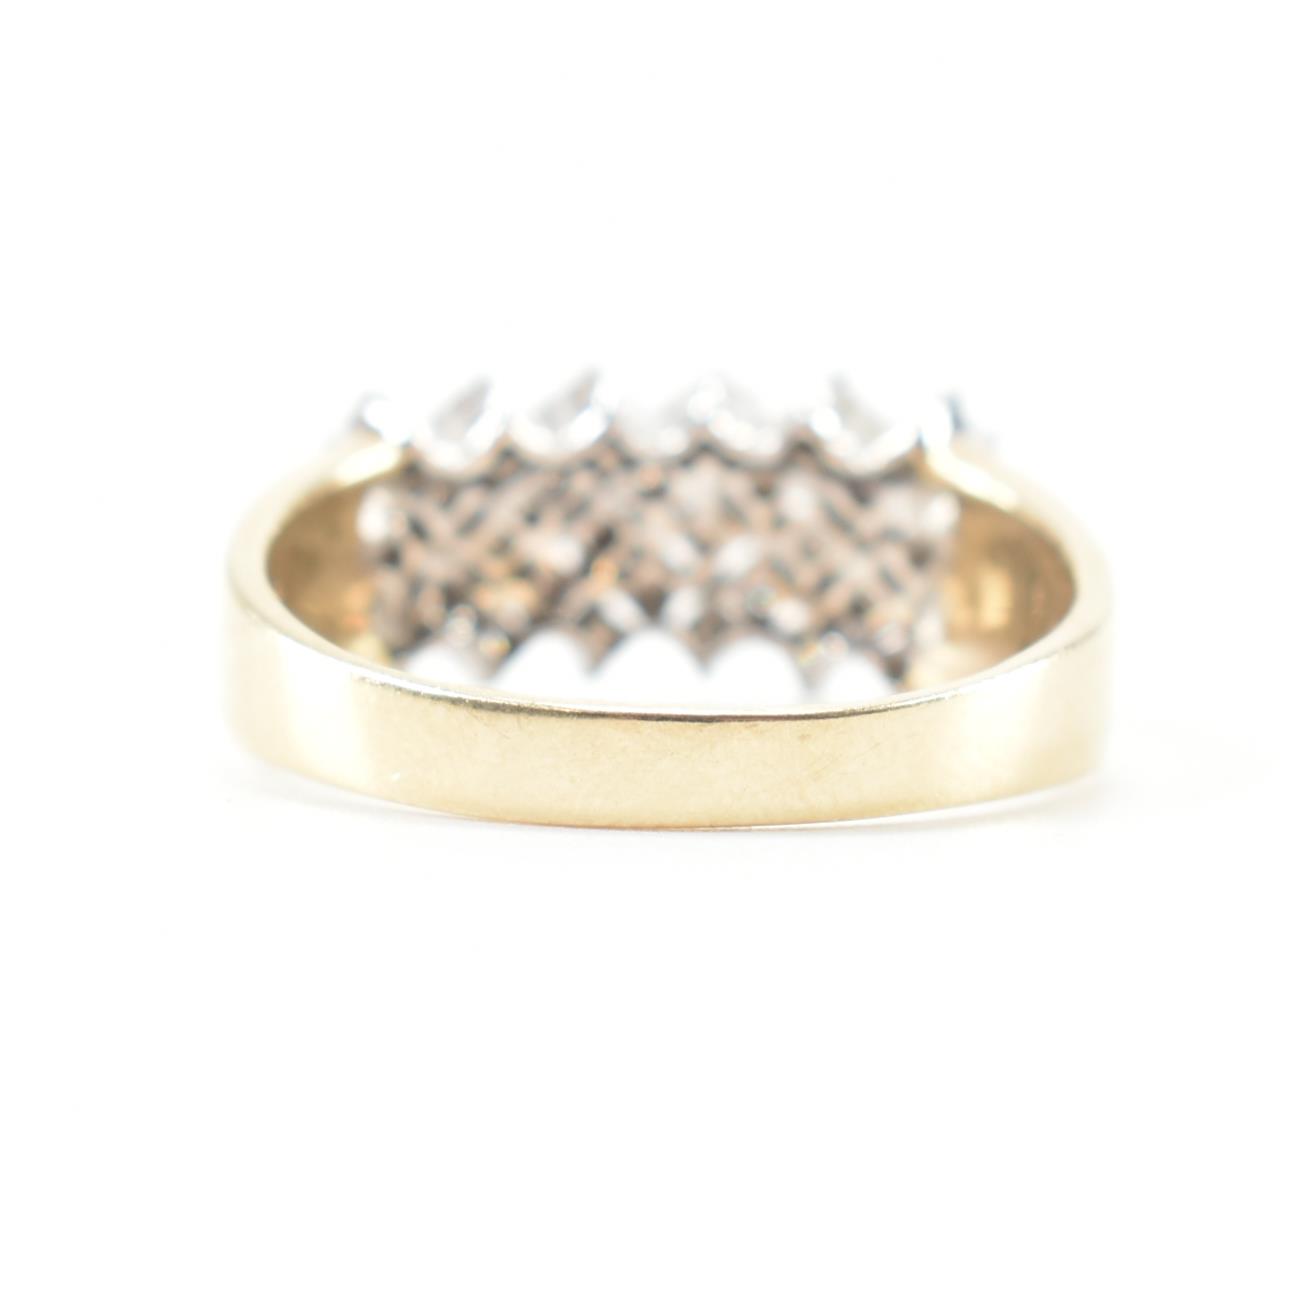 HALLMARKED 9CT GOLD & DIAMOND CLUSTER RING - Image 3 of 9